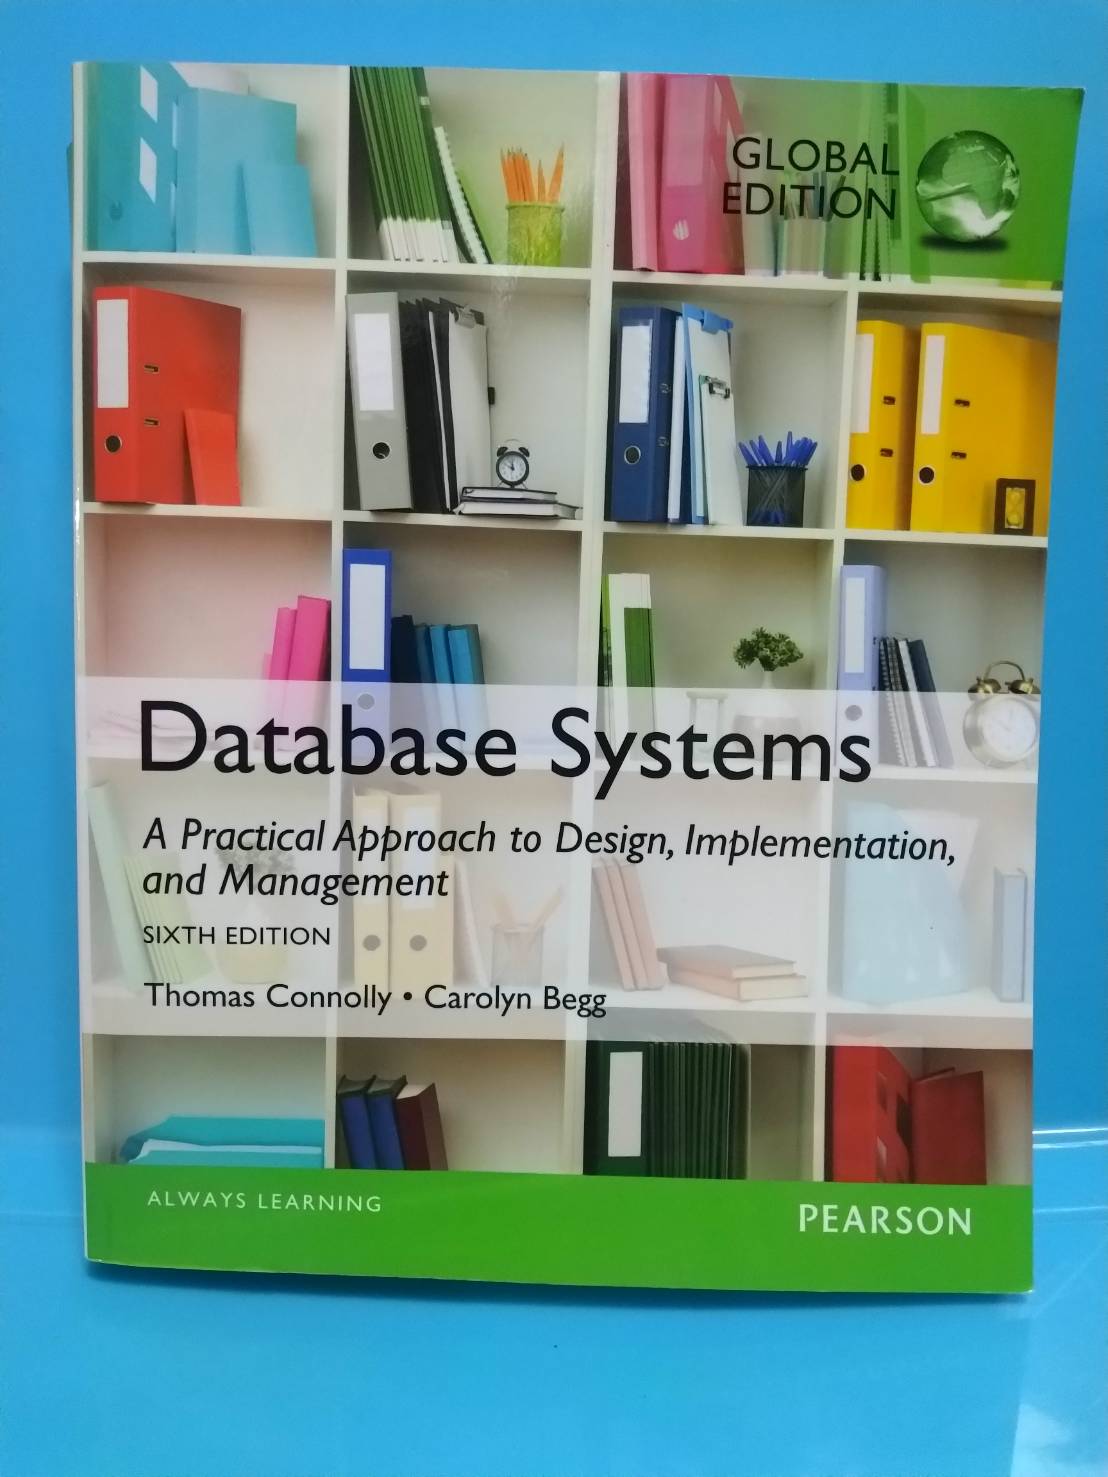 Database Systems: A Practical Approach to Design, Implementation, and Management 詳細資料